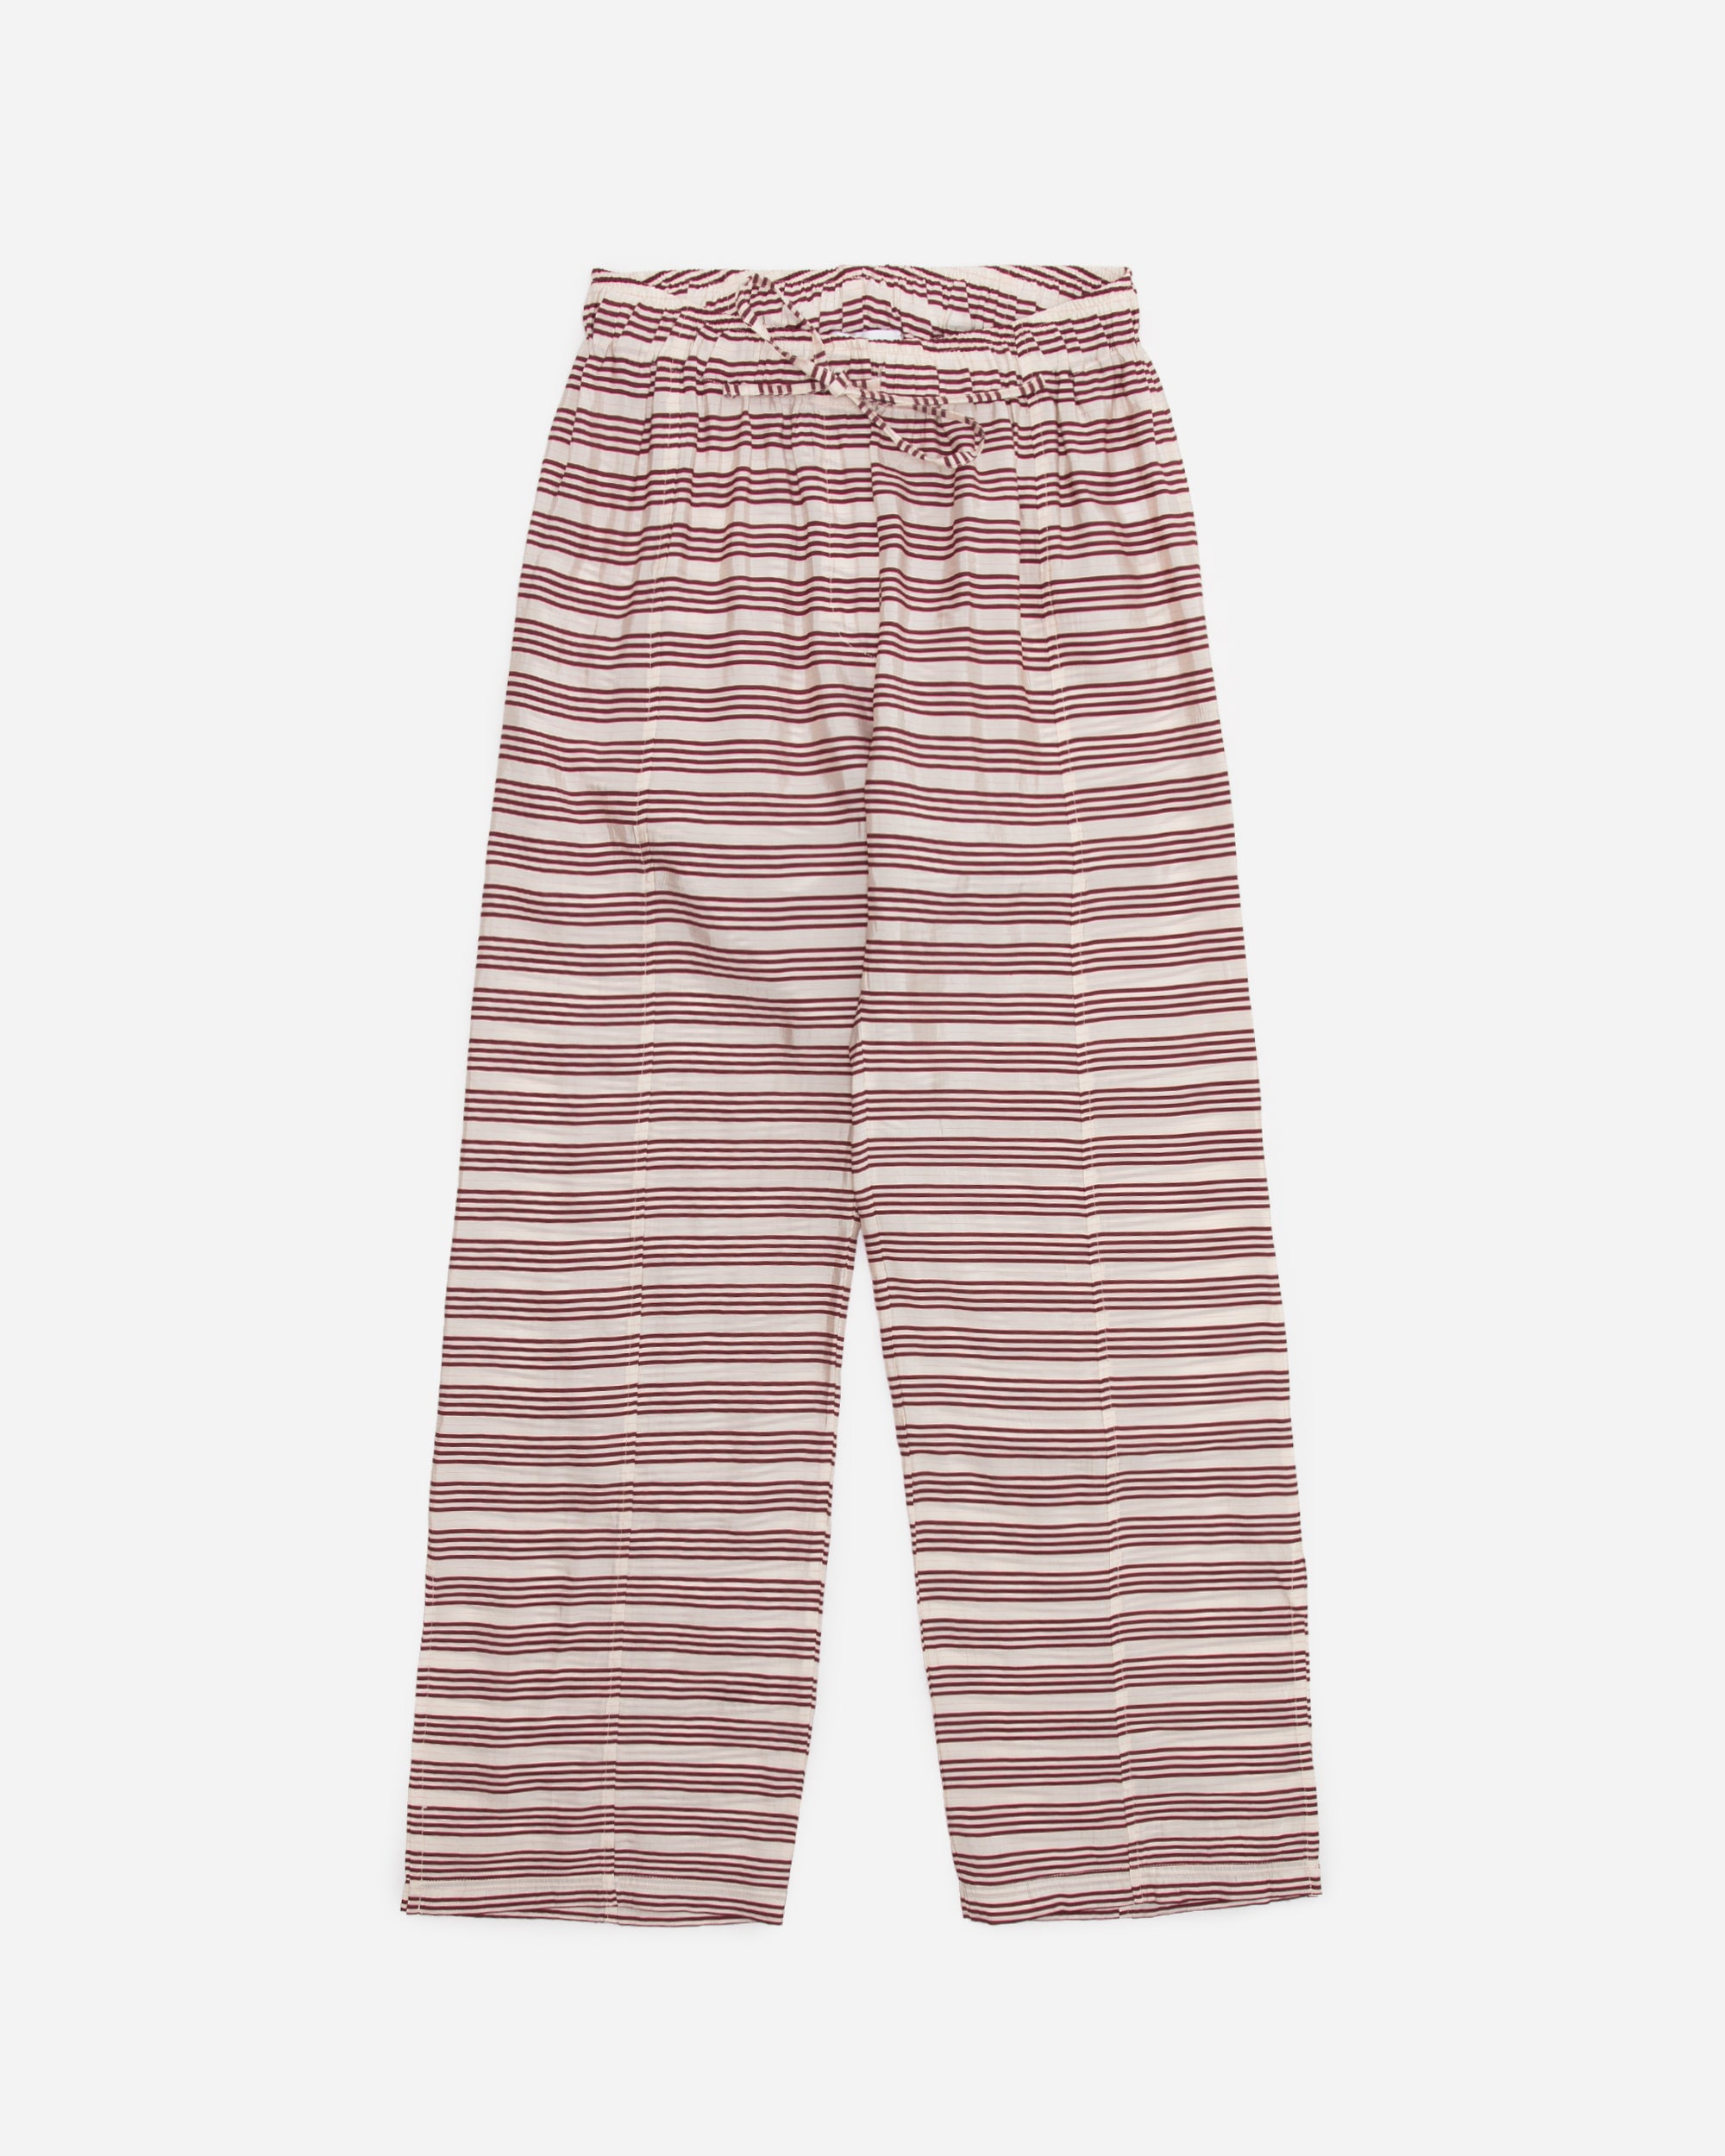 SOULLAND Cilra Pants White/Red Stripes 21173-1188